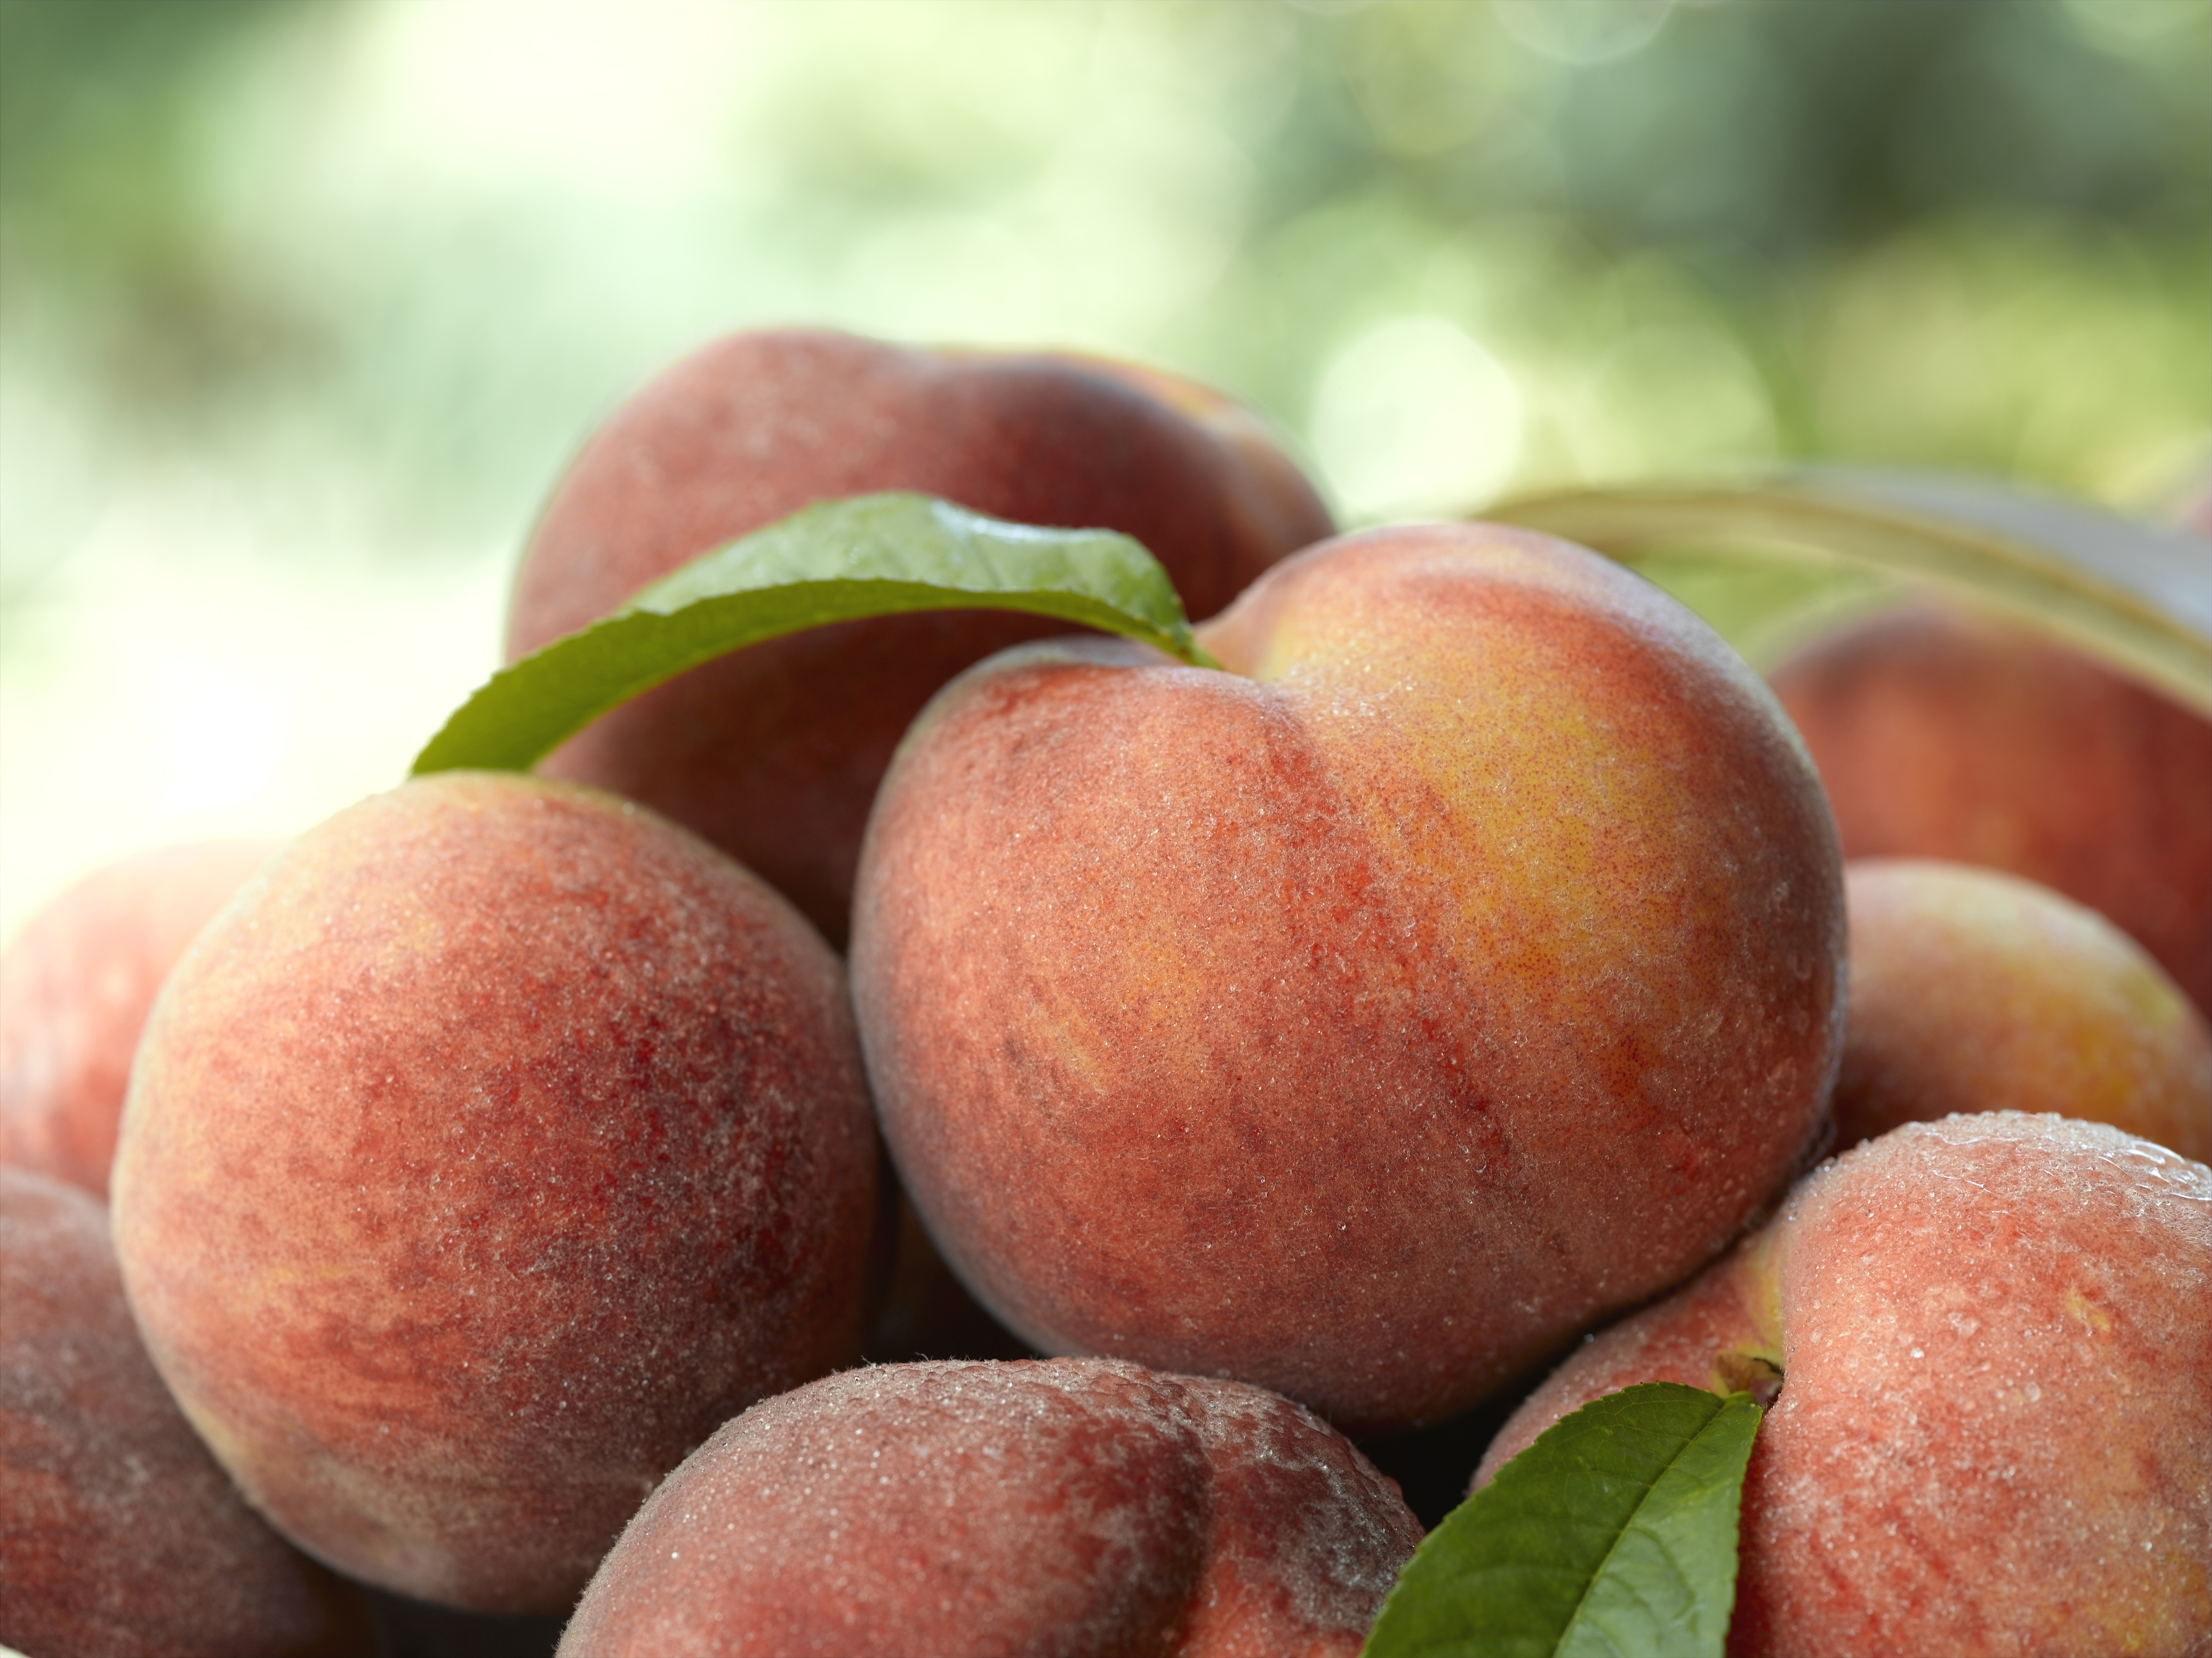 Georgia Peach Prices Are Rising After the State Lost Most of Its Crop